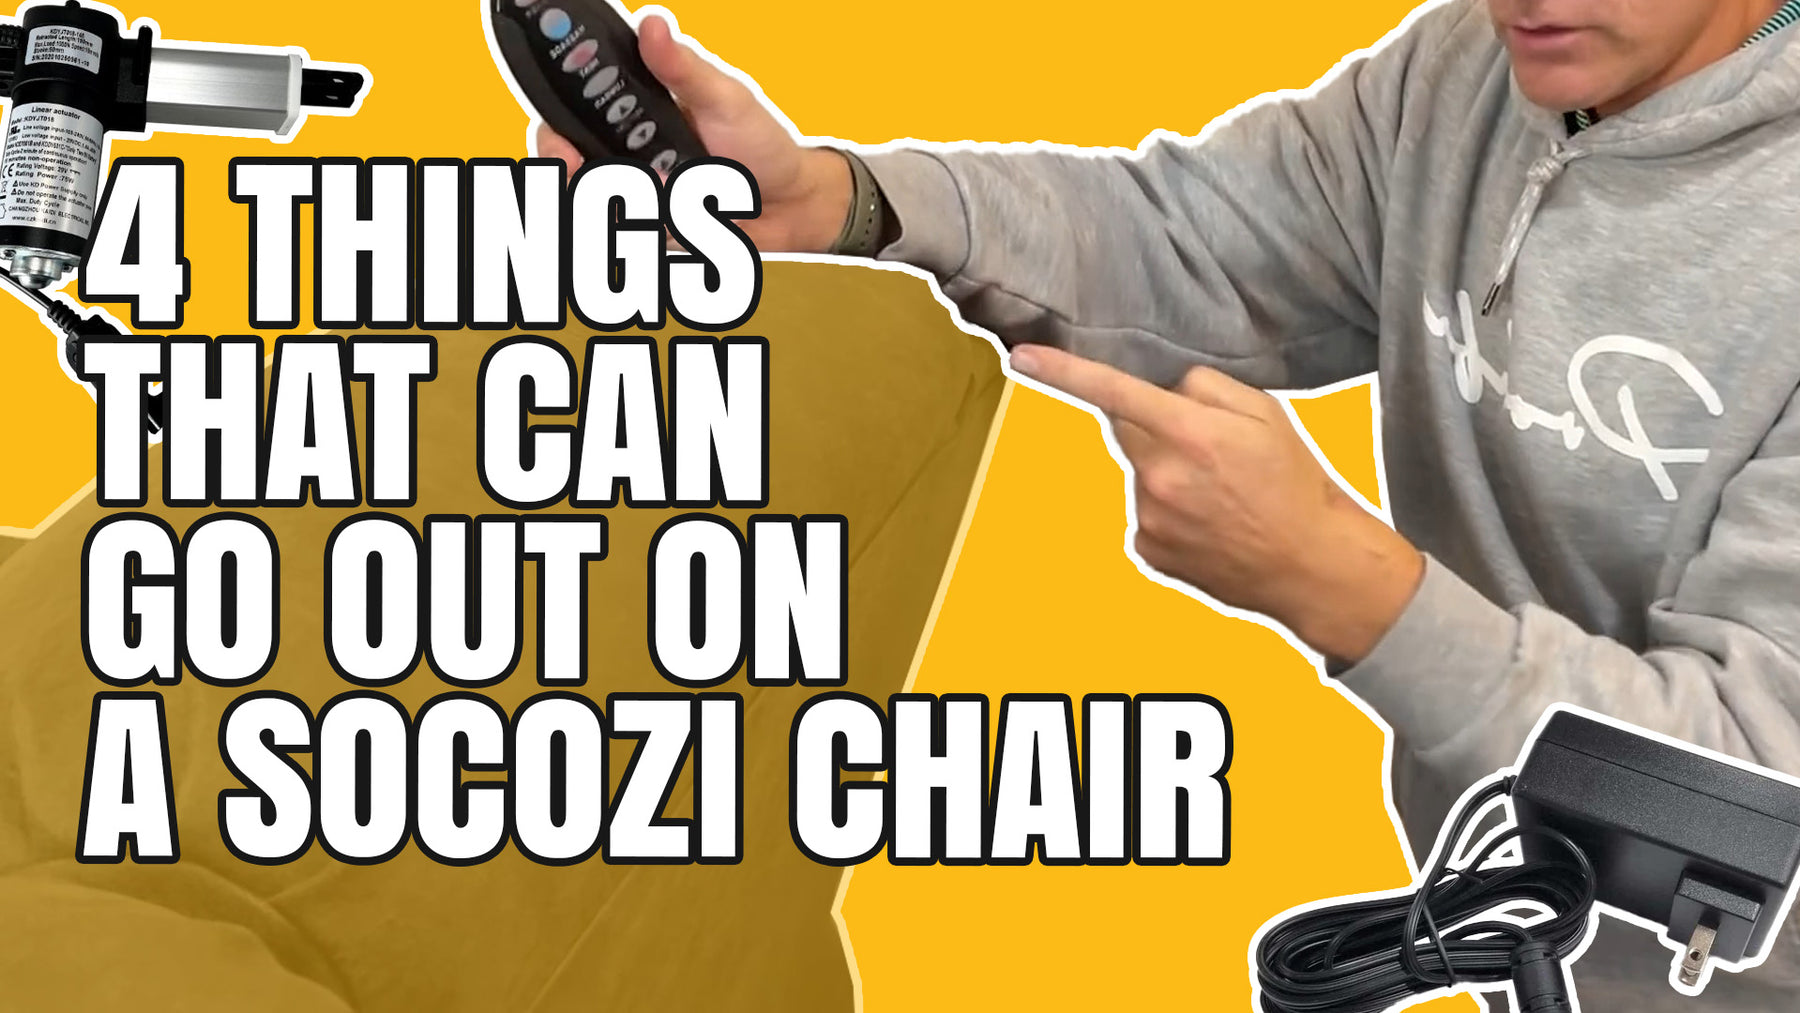 4 Fixes for issues with Socozi Chairs - How to Fix your Southern Motion Socozi Lift Chair, Zero Gravity Chair or Socozi Sofa, Loveseat Chair